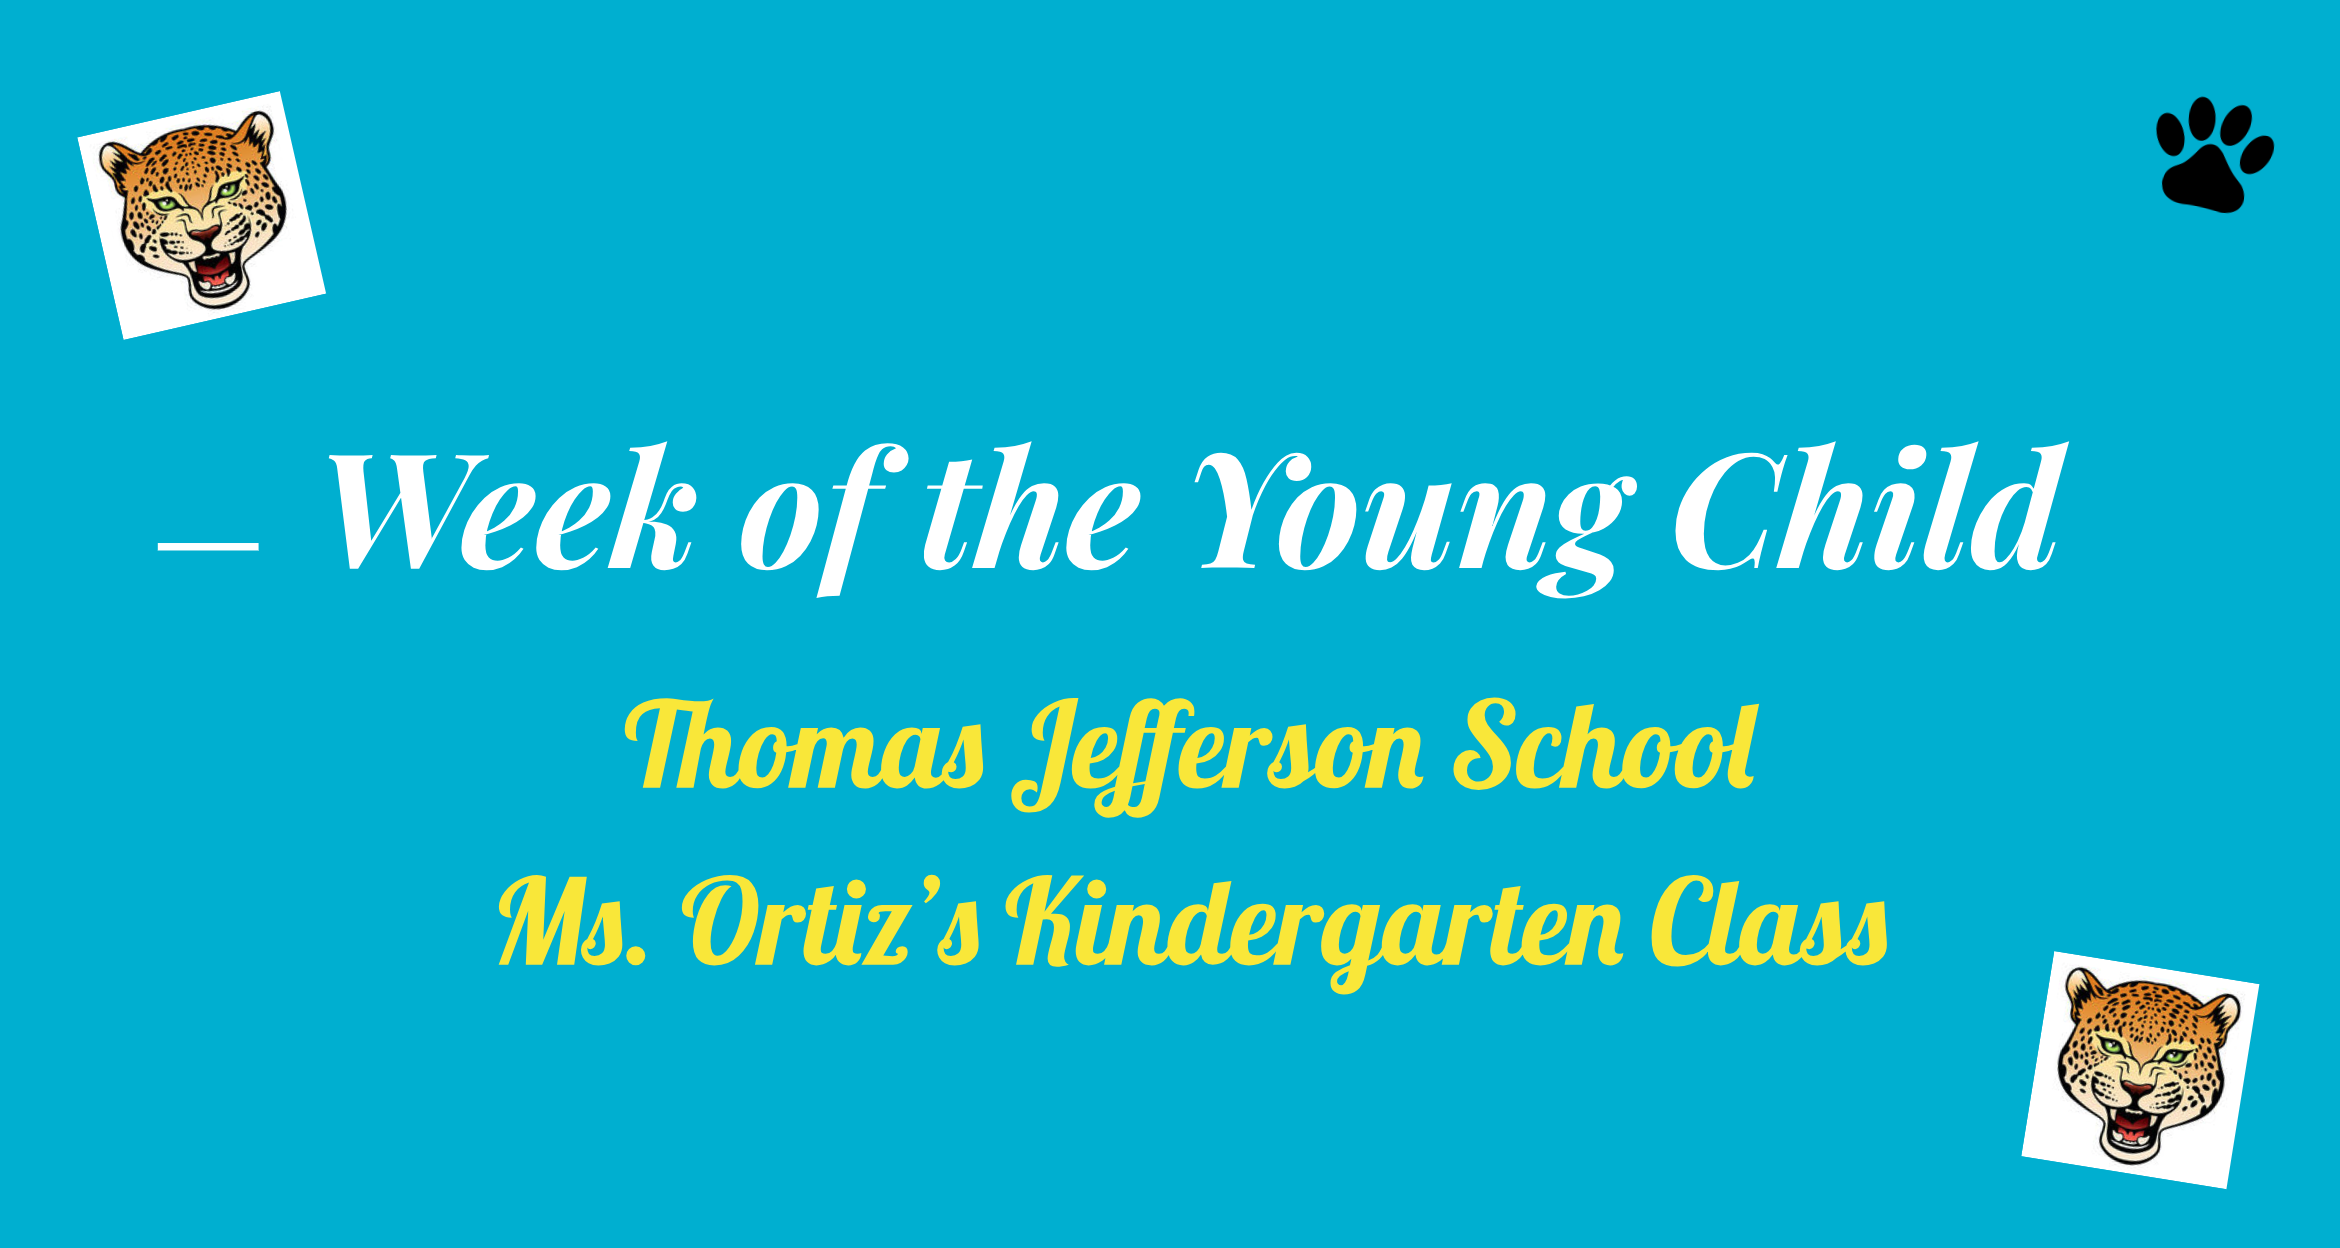 Week of the Young Child at the Jefferson School